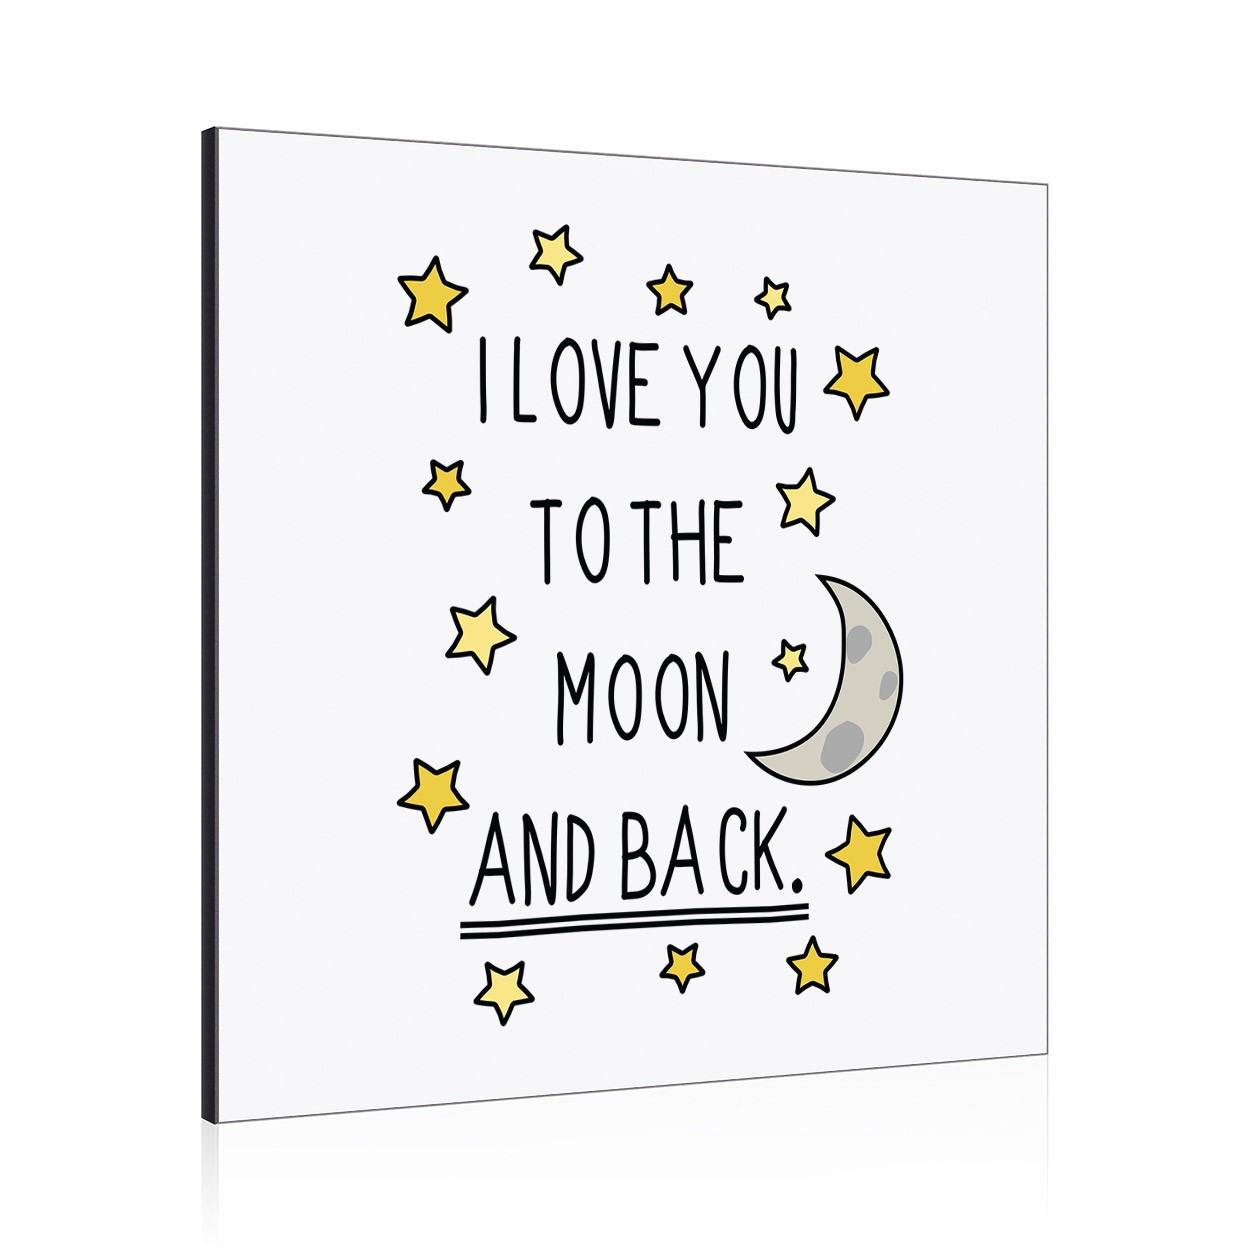 I Love You To The Moon And Back Wall Art Panel